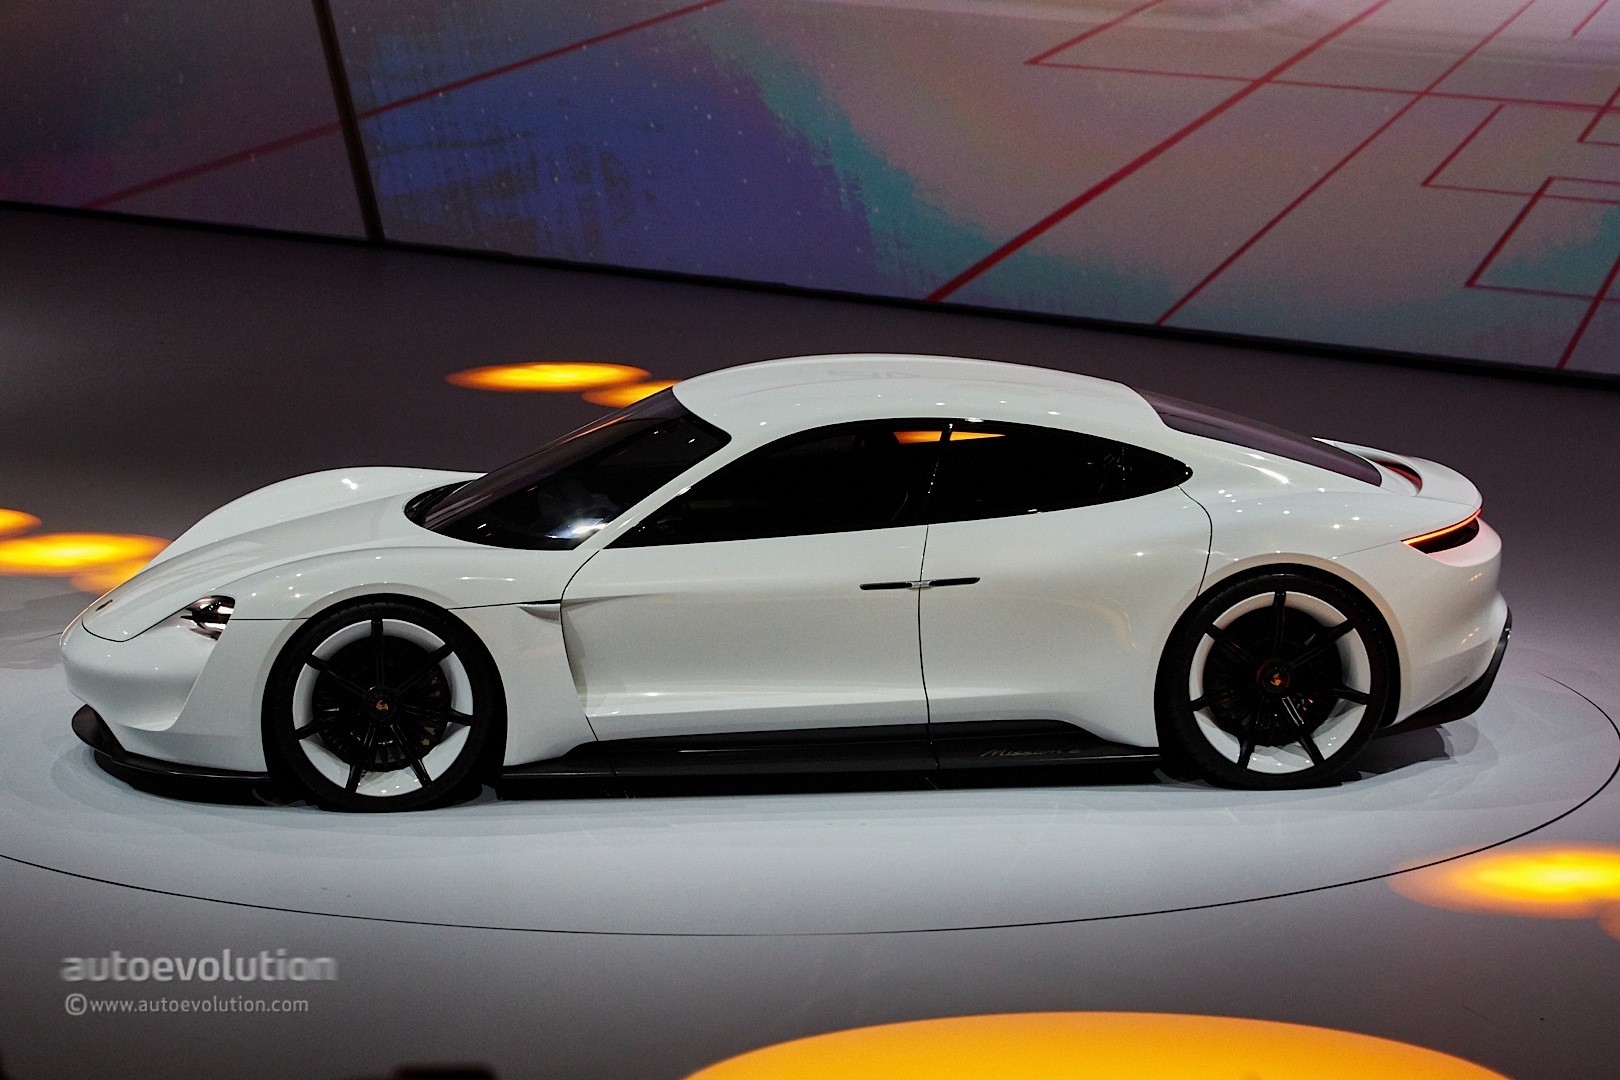 Porsche Mission E Gets Production Green Light, Coming by 2020